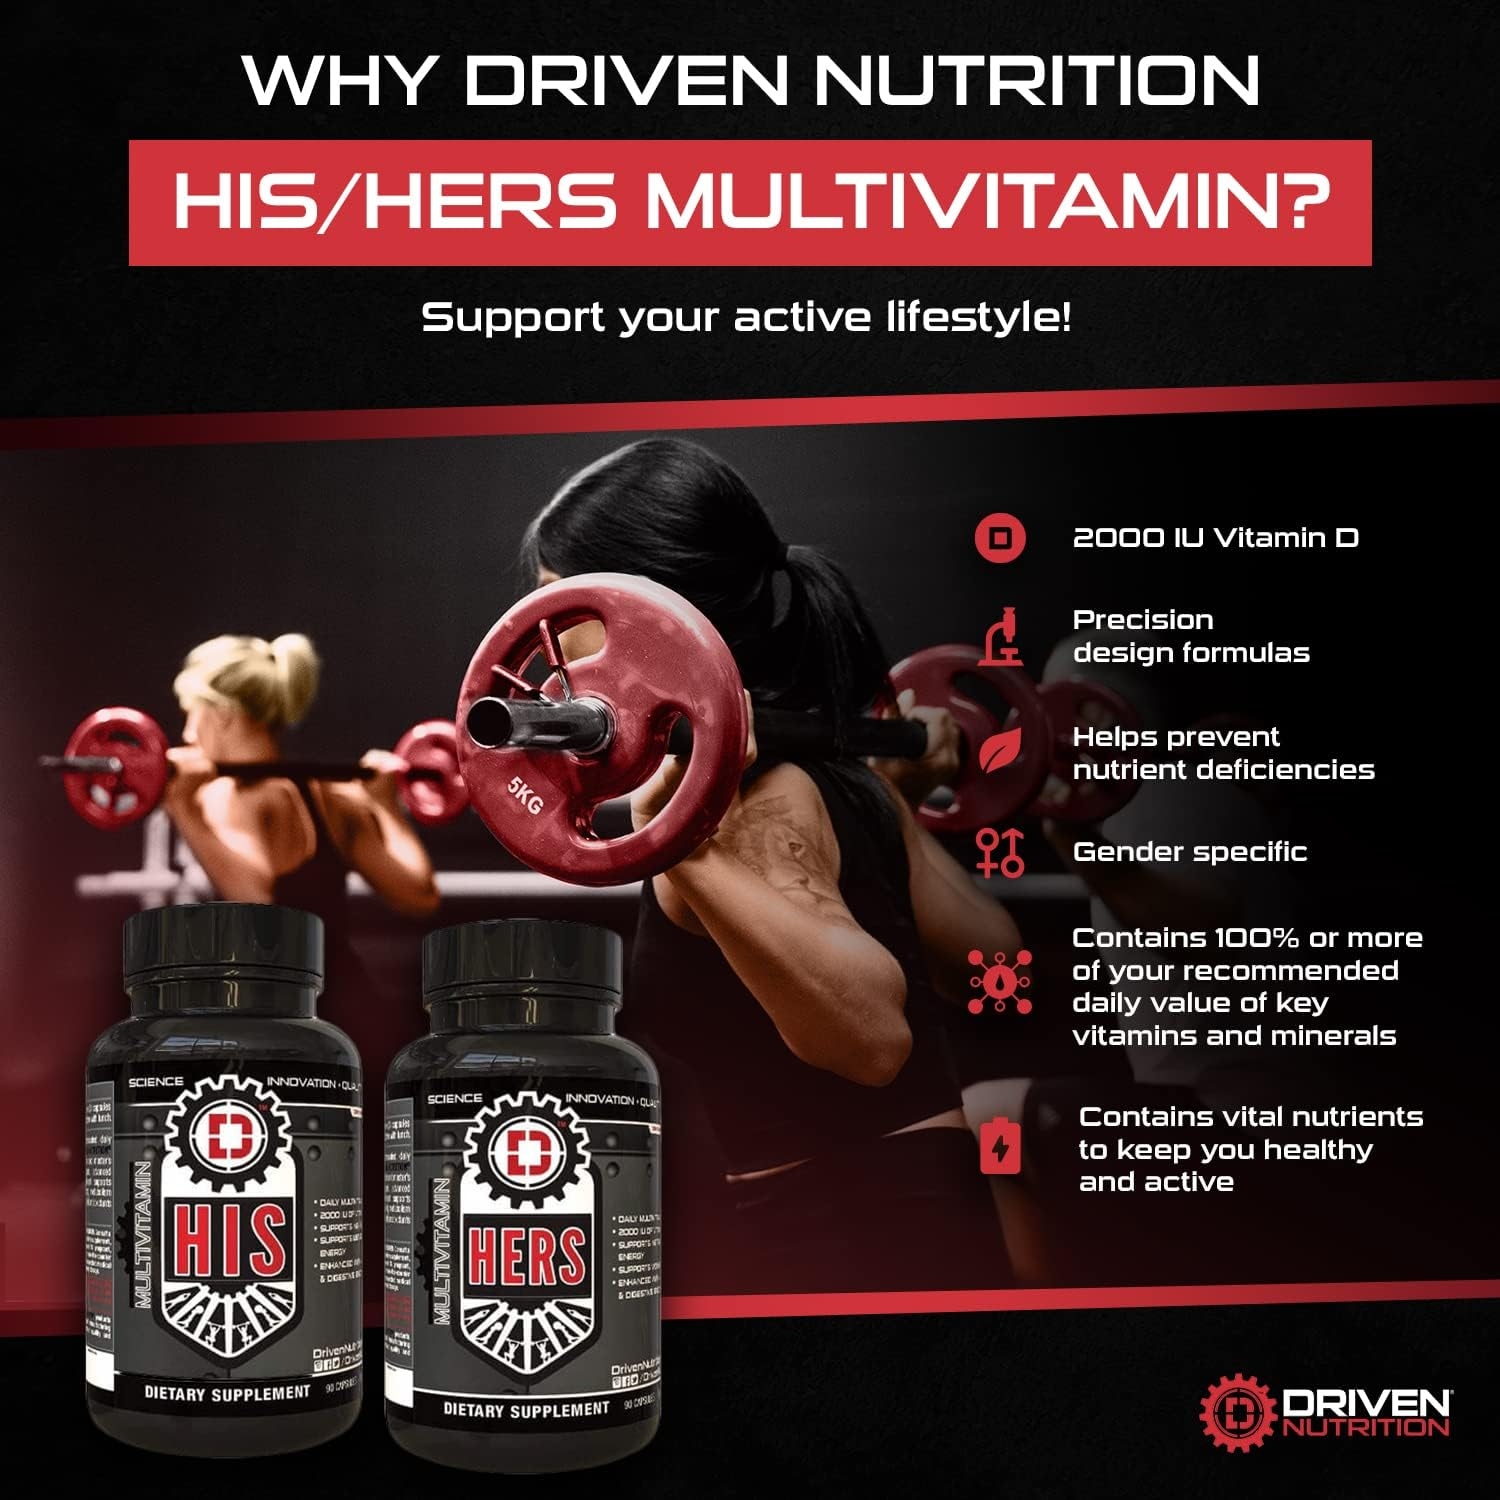 Driven Nutrition Hers Multivitamin, 90 Ct - Women's Blend of Vitamins, Minerals & Nutrients - Energy, Metabolism, Immune Support, Recovery & Brain Function - Vitamin A, E, D, C, Magnesium, Zinc & More